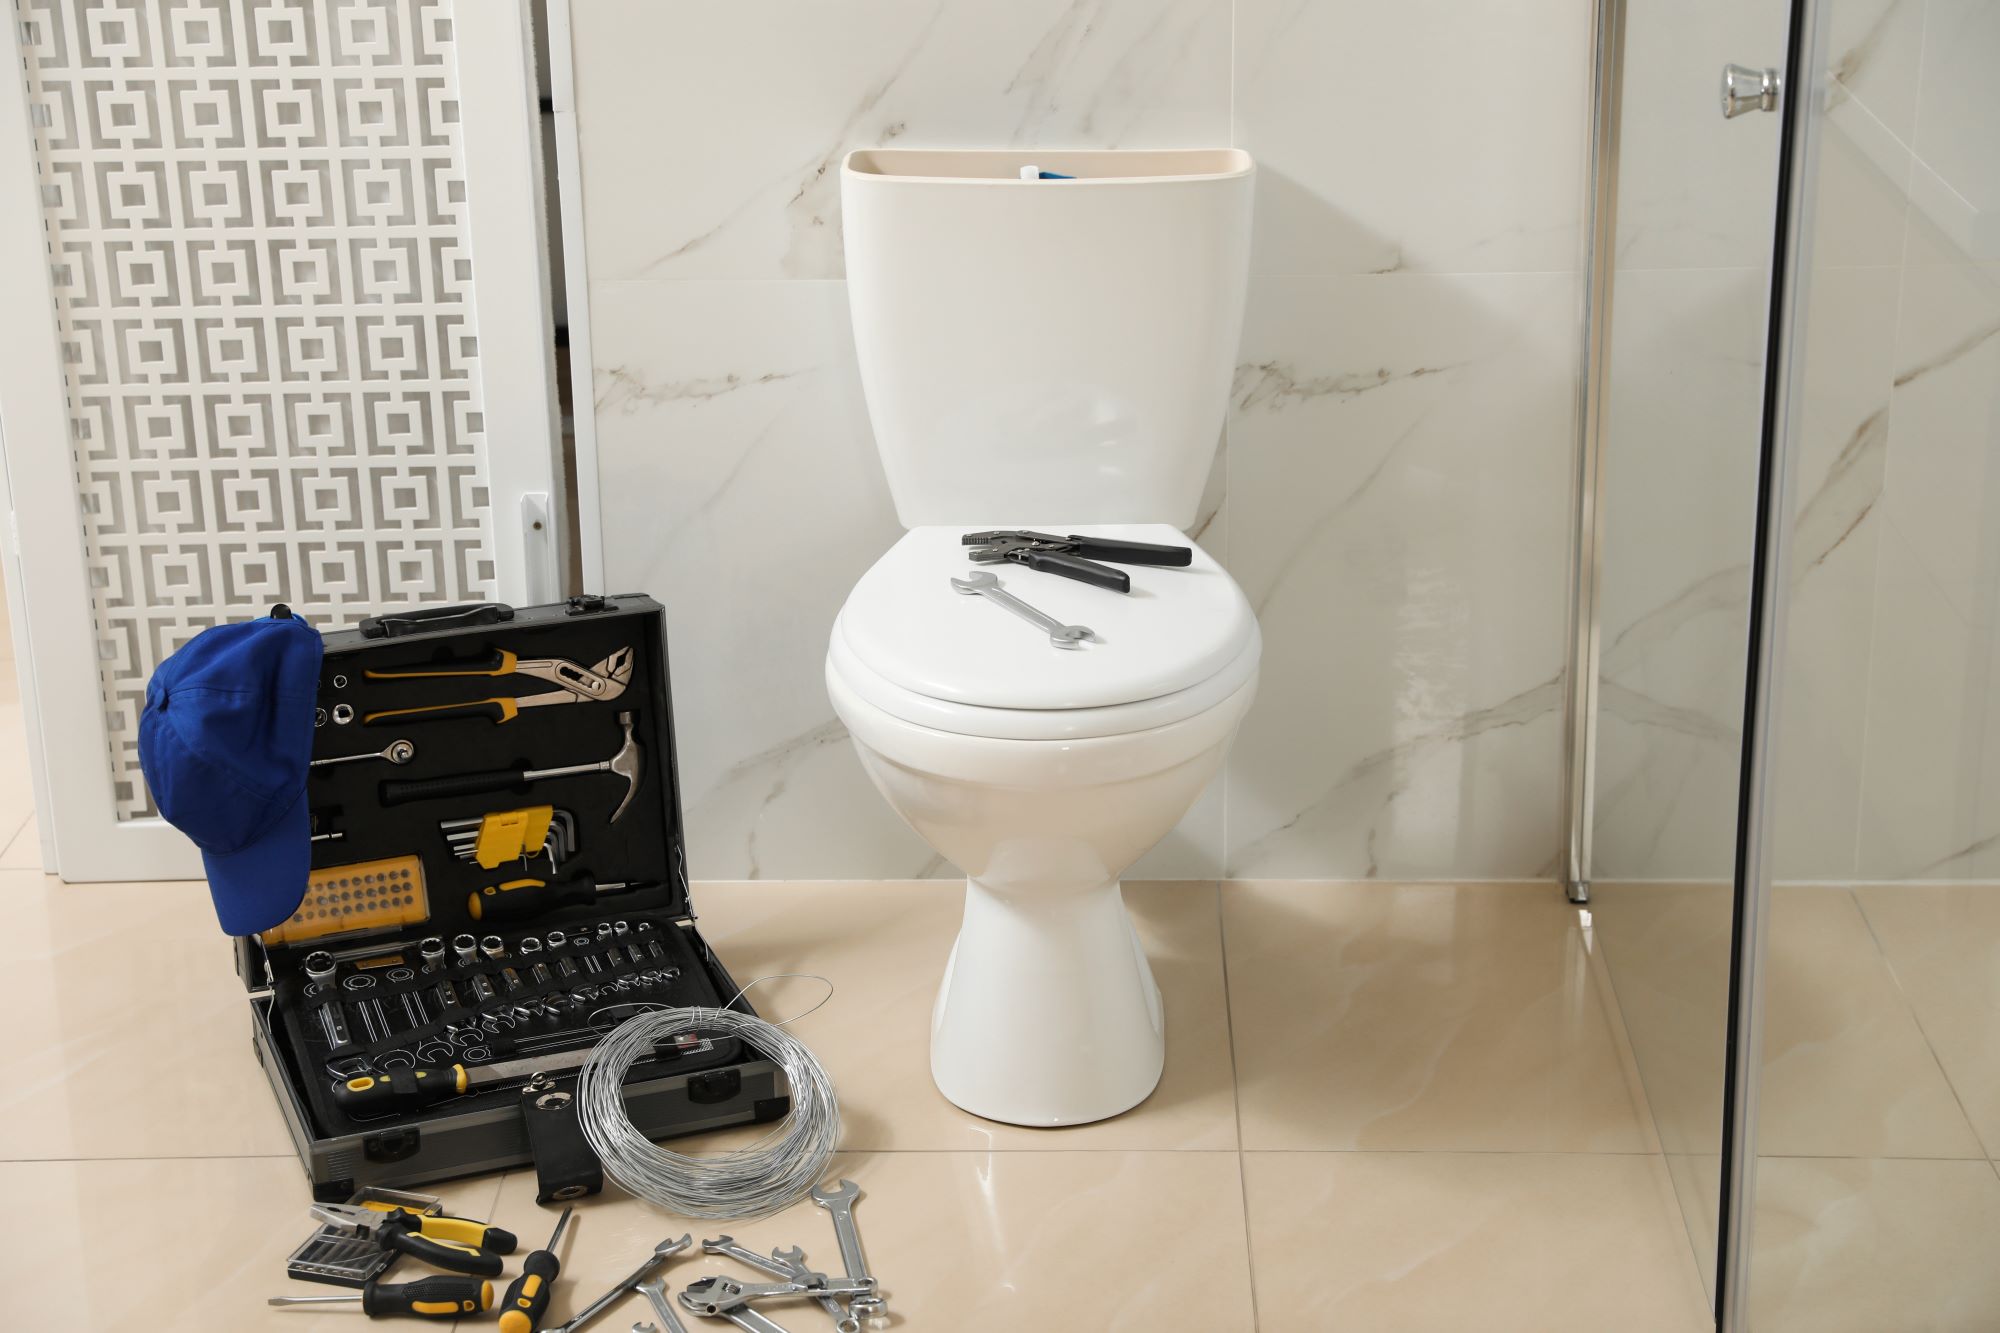 toilet being repaired with tools